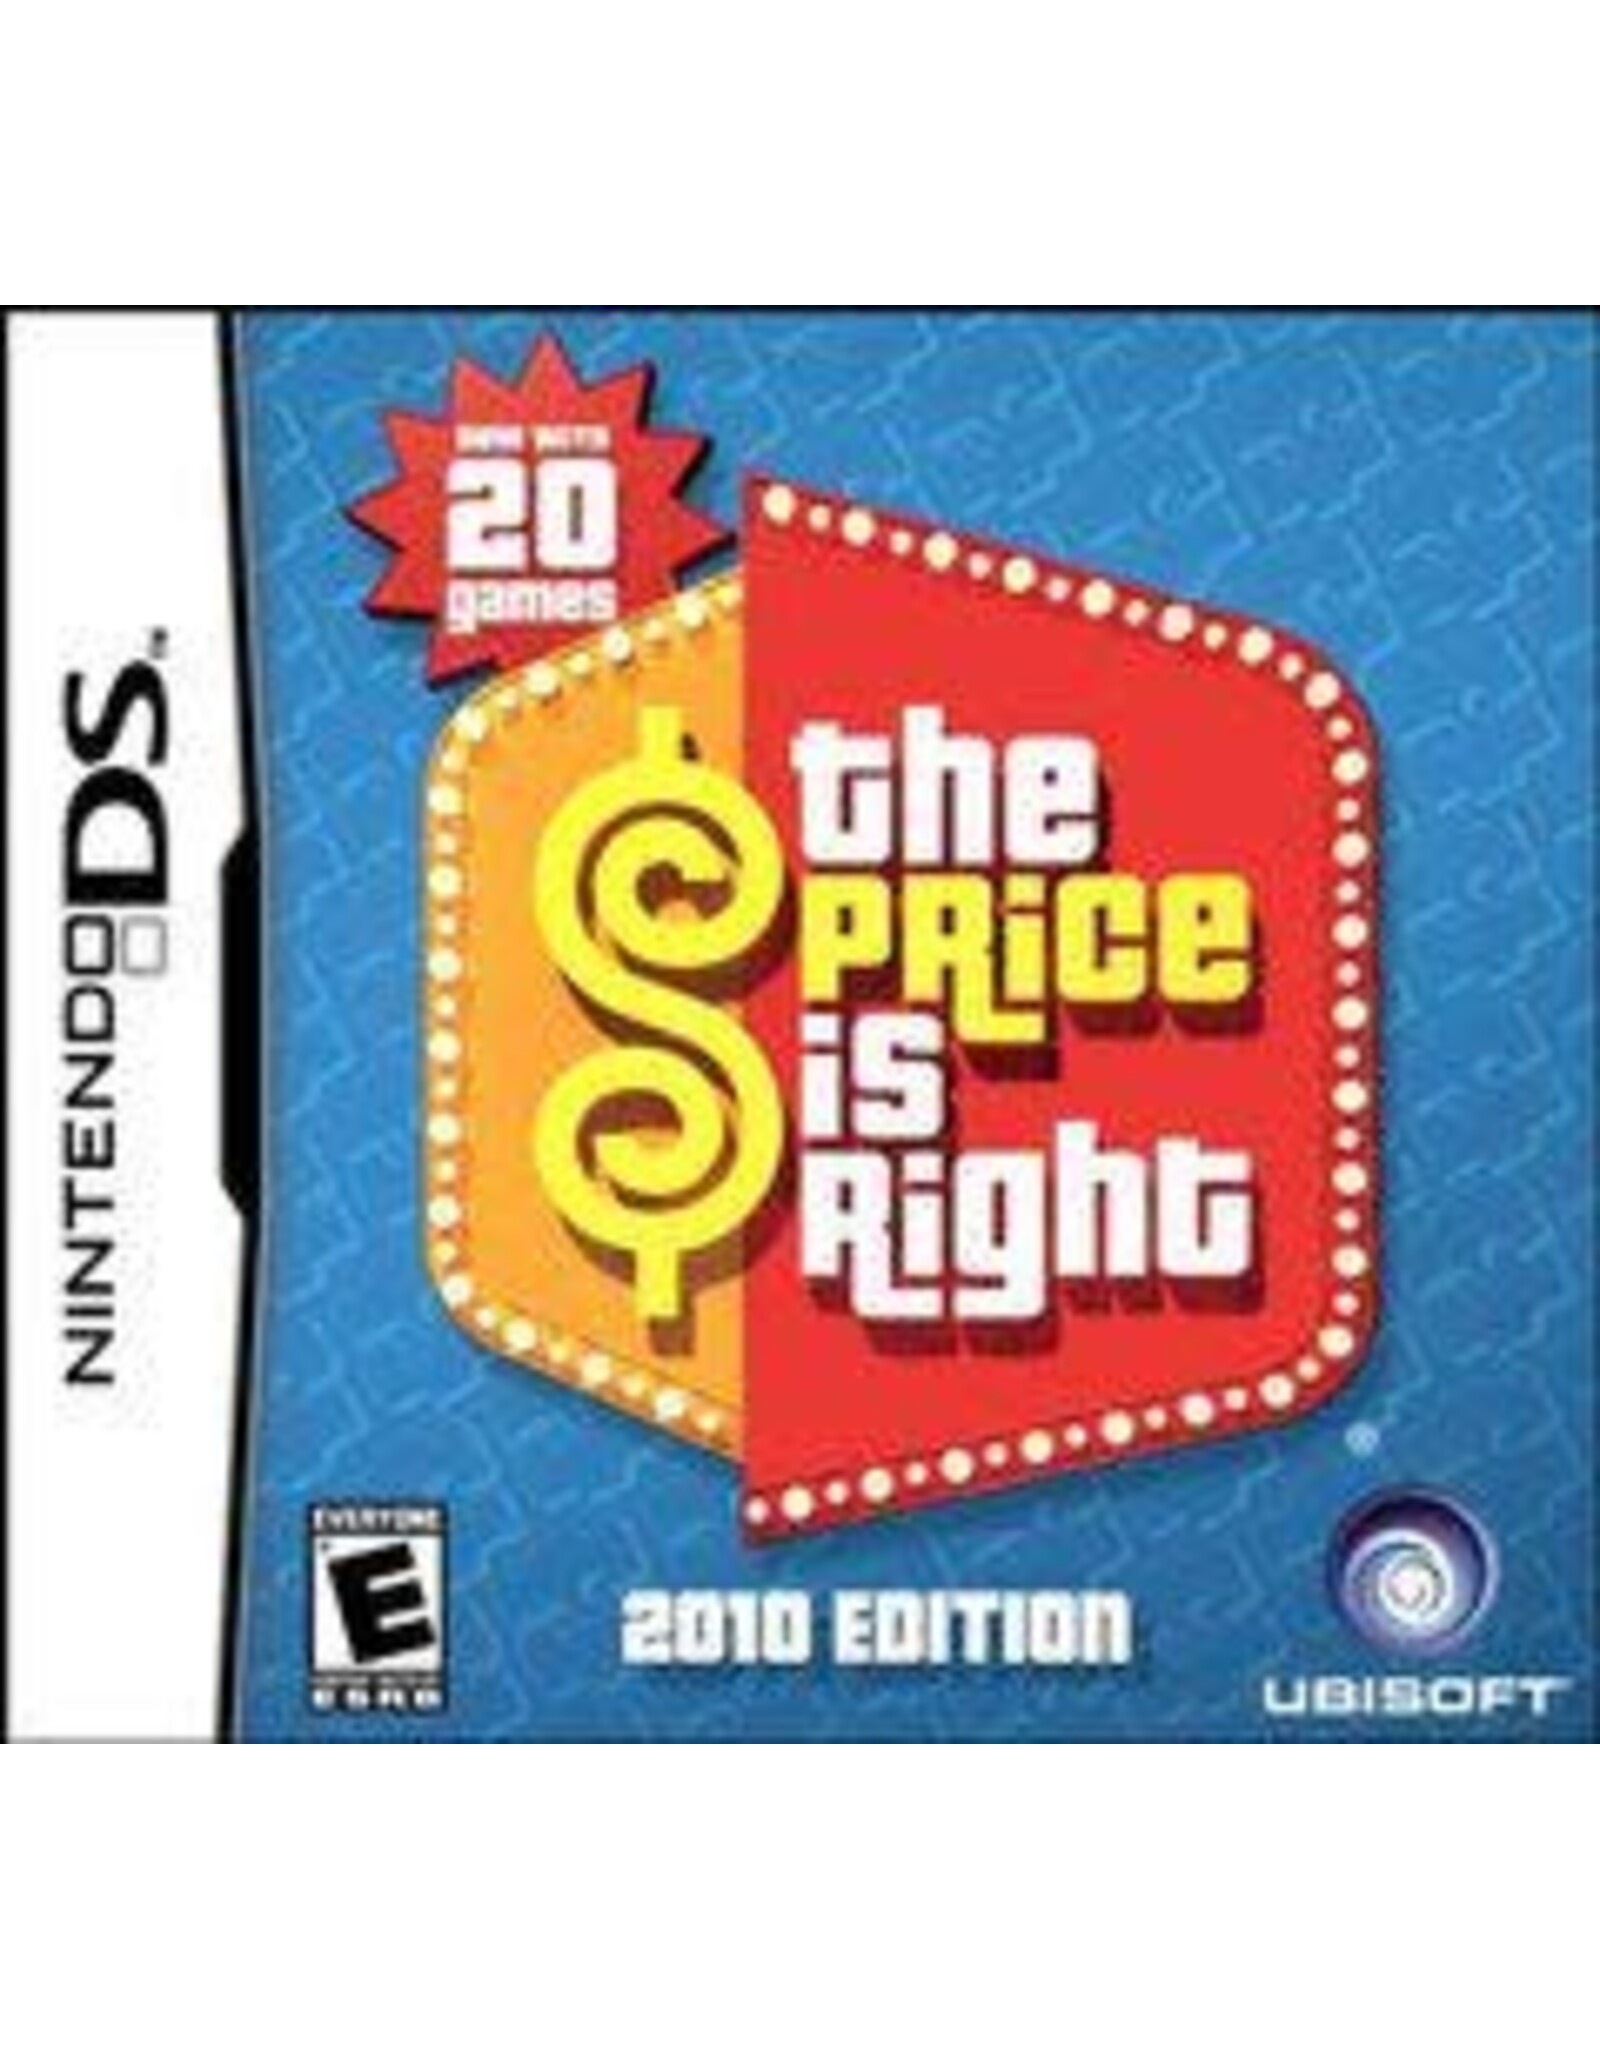 Nintendo DS The Price is Right: 2010 Edition (Cart Only)